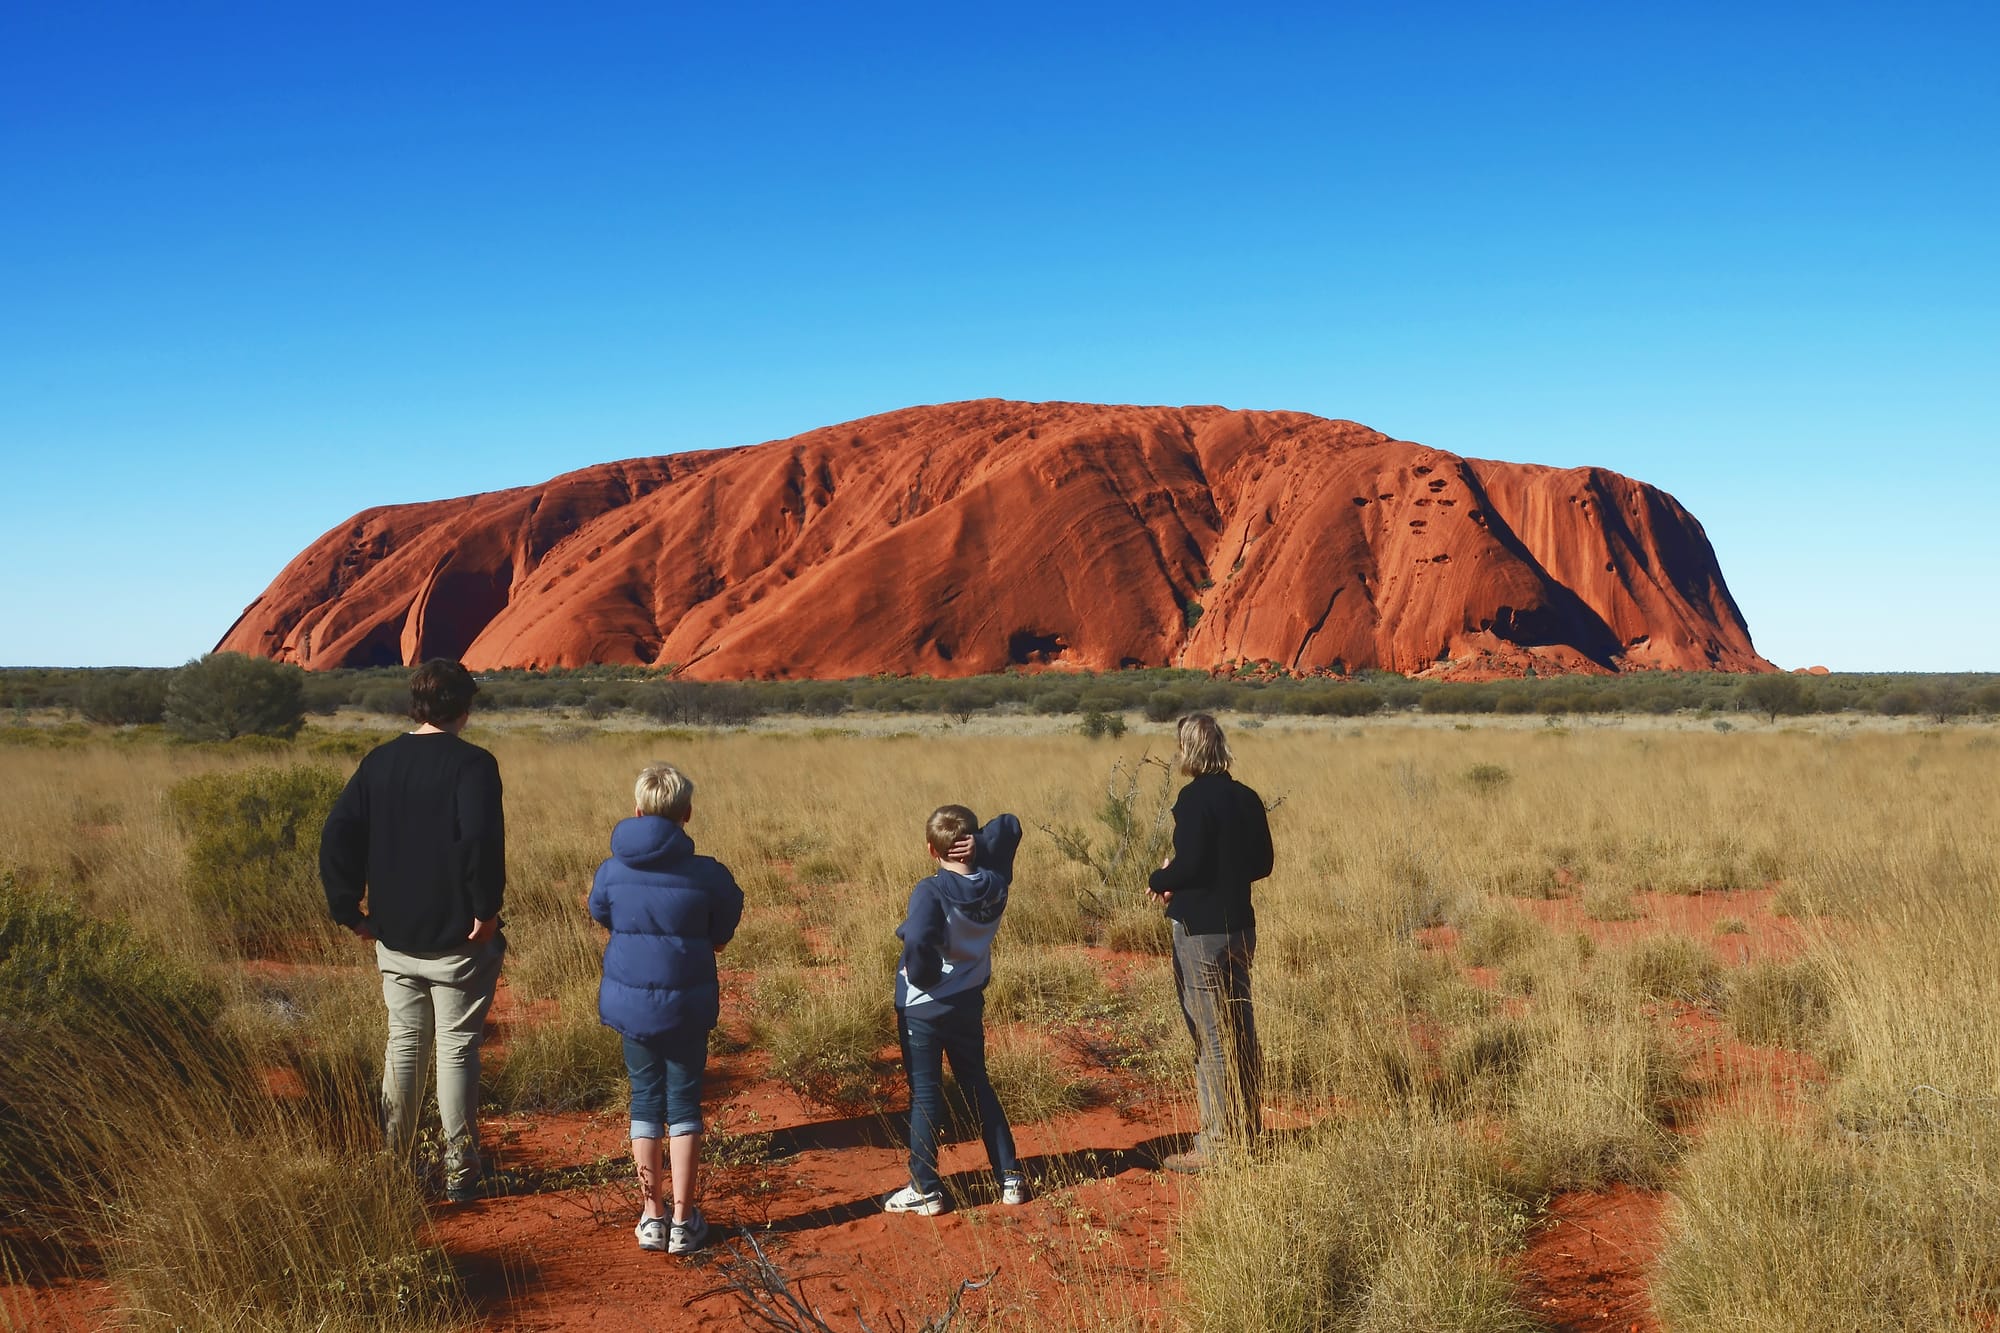 Showing respect through photography: The case of Uluru